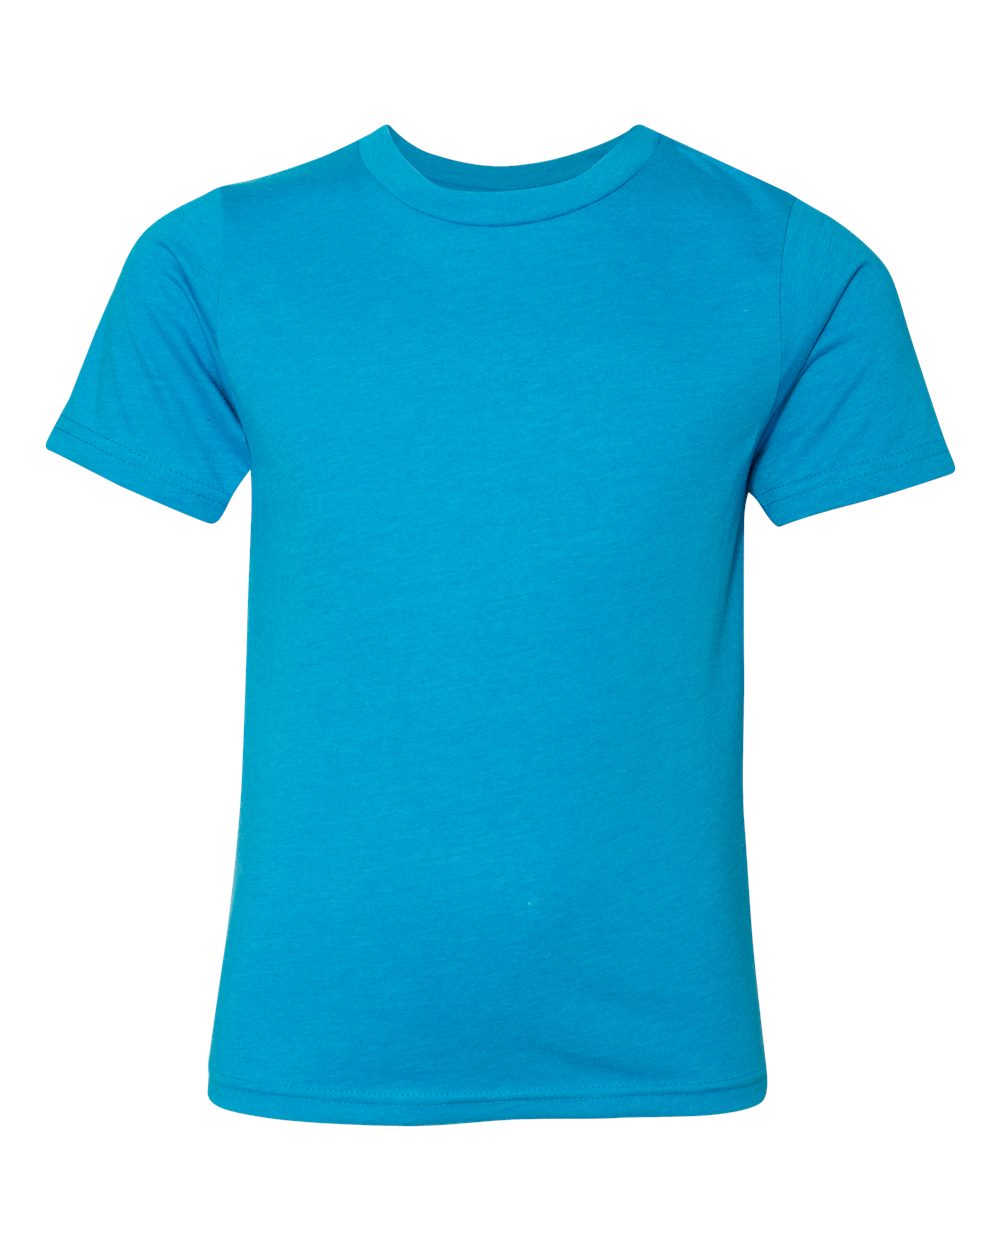 Next_Level_3312_Turquoise_Front_High.jpg